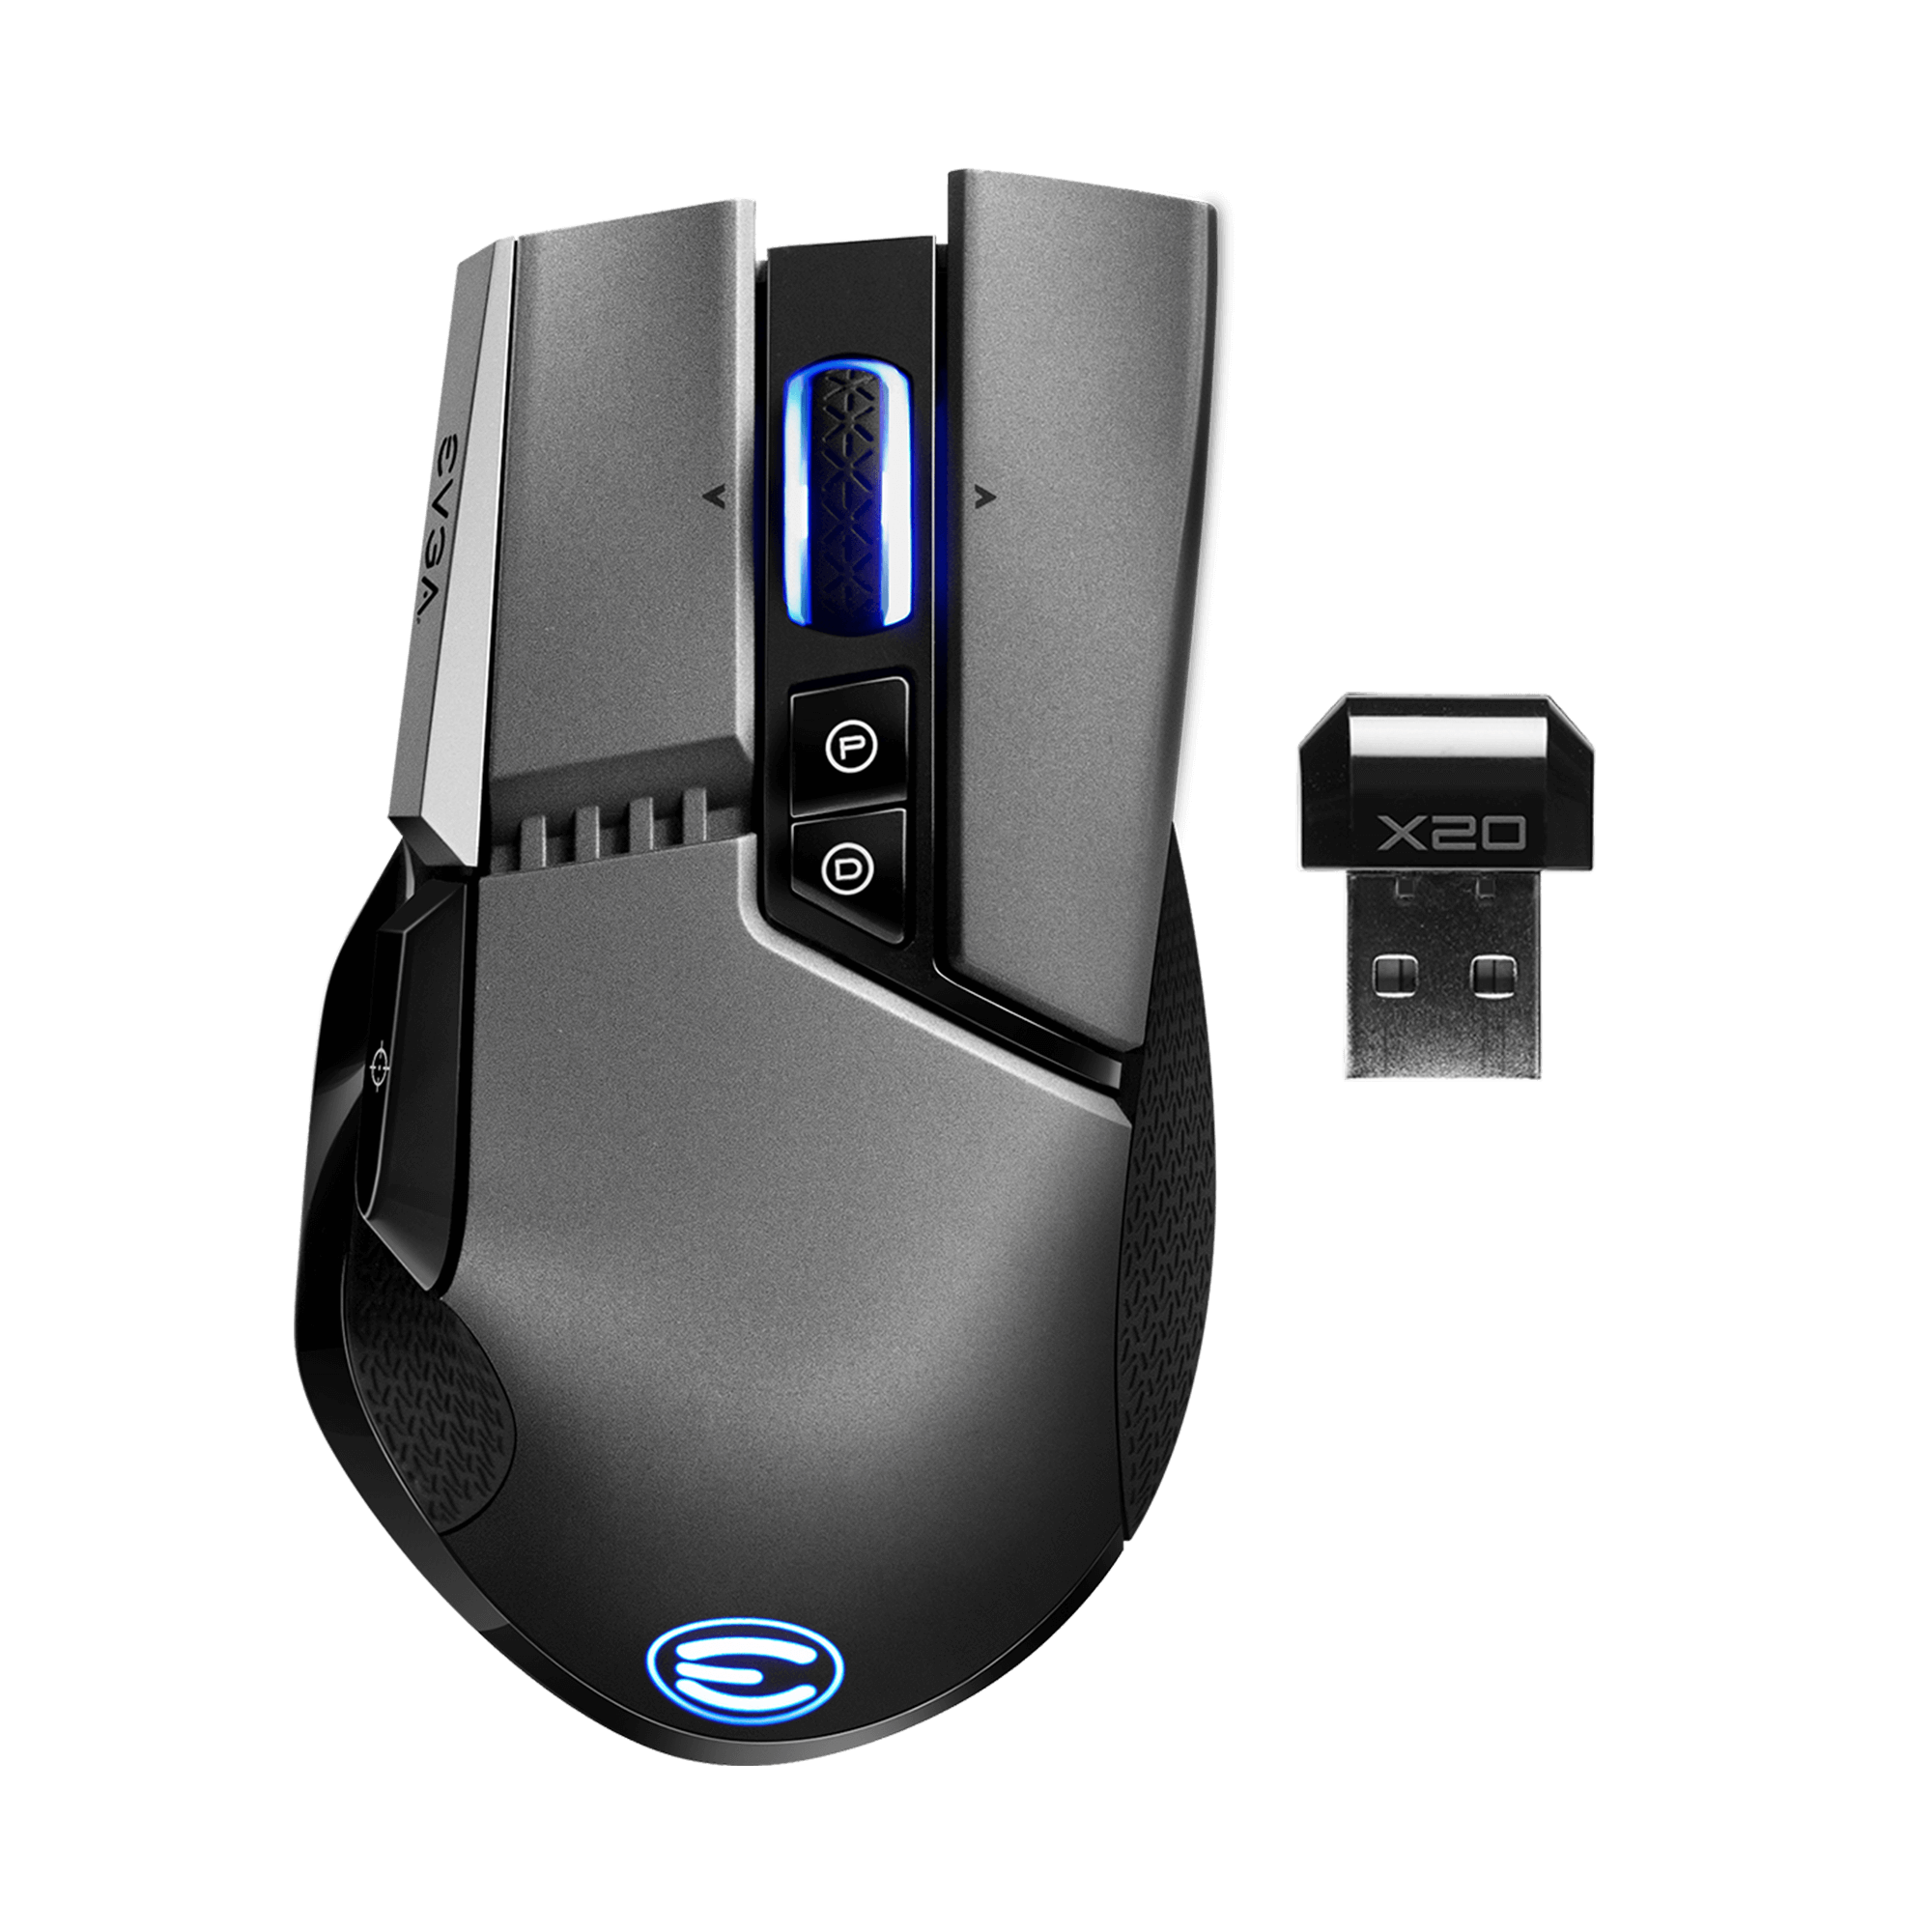 EVGA - Products - EVGA X20 Wireless Gaming Mouse, Wireless, Grey